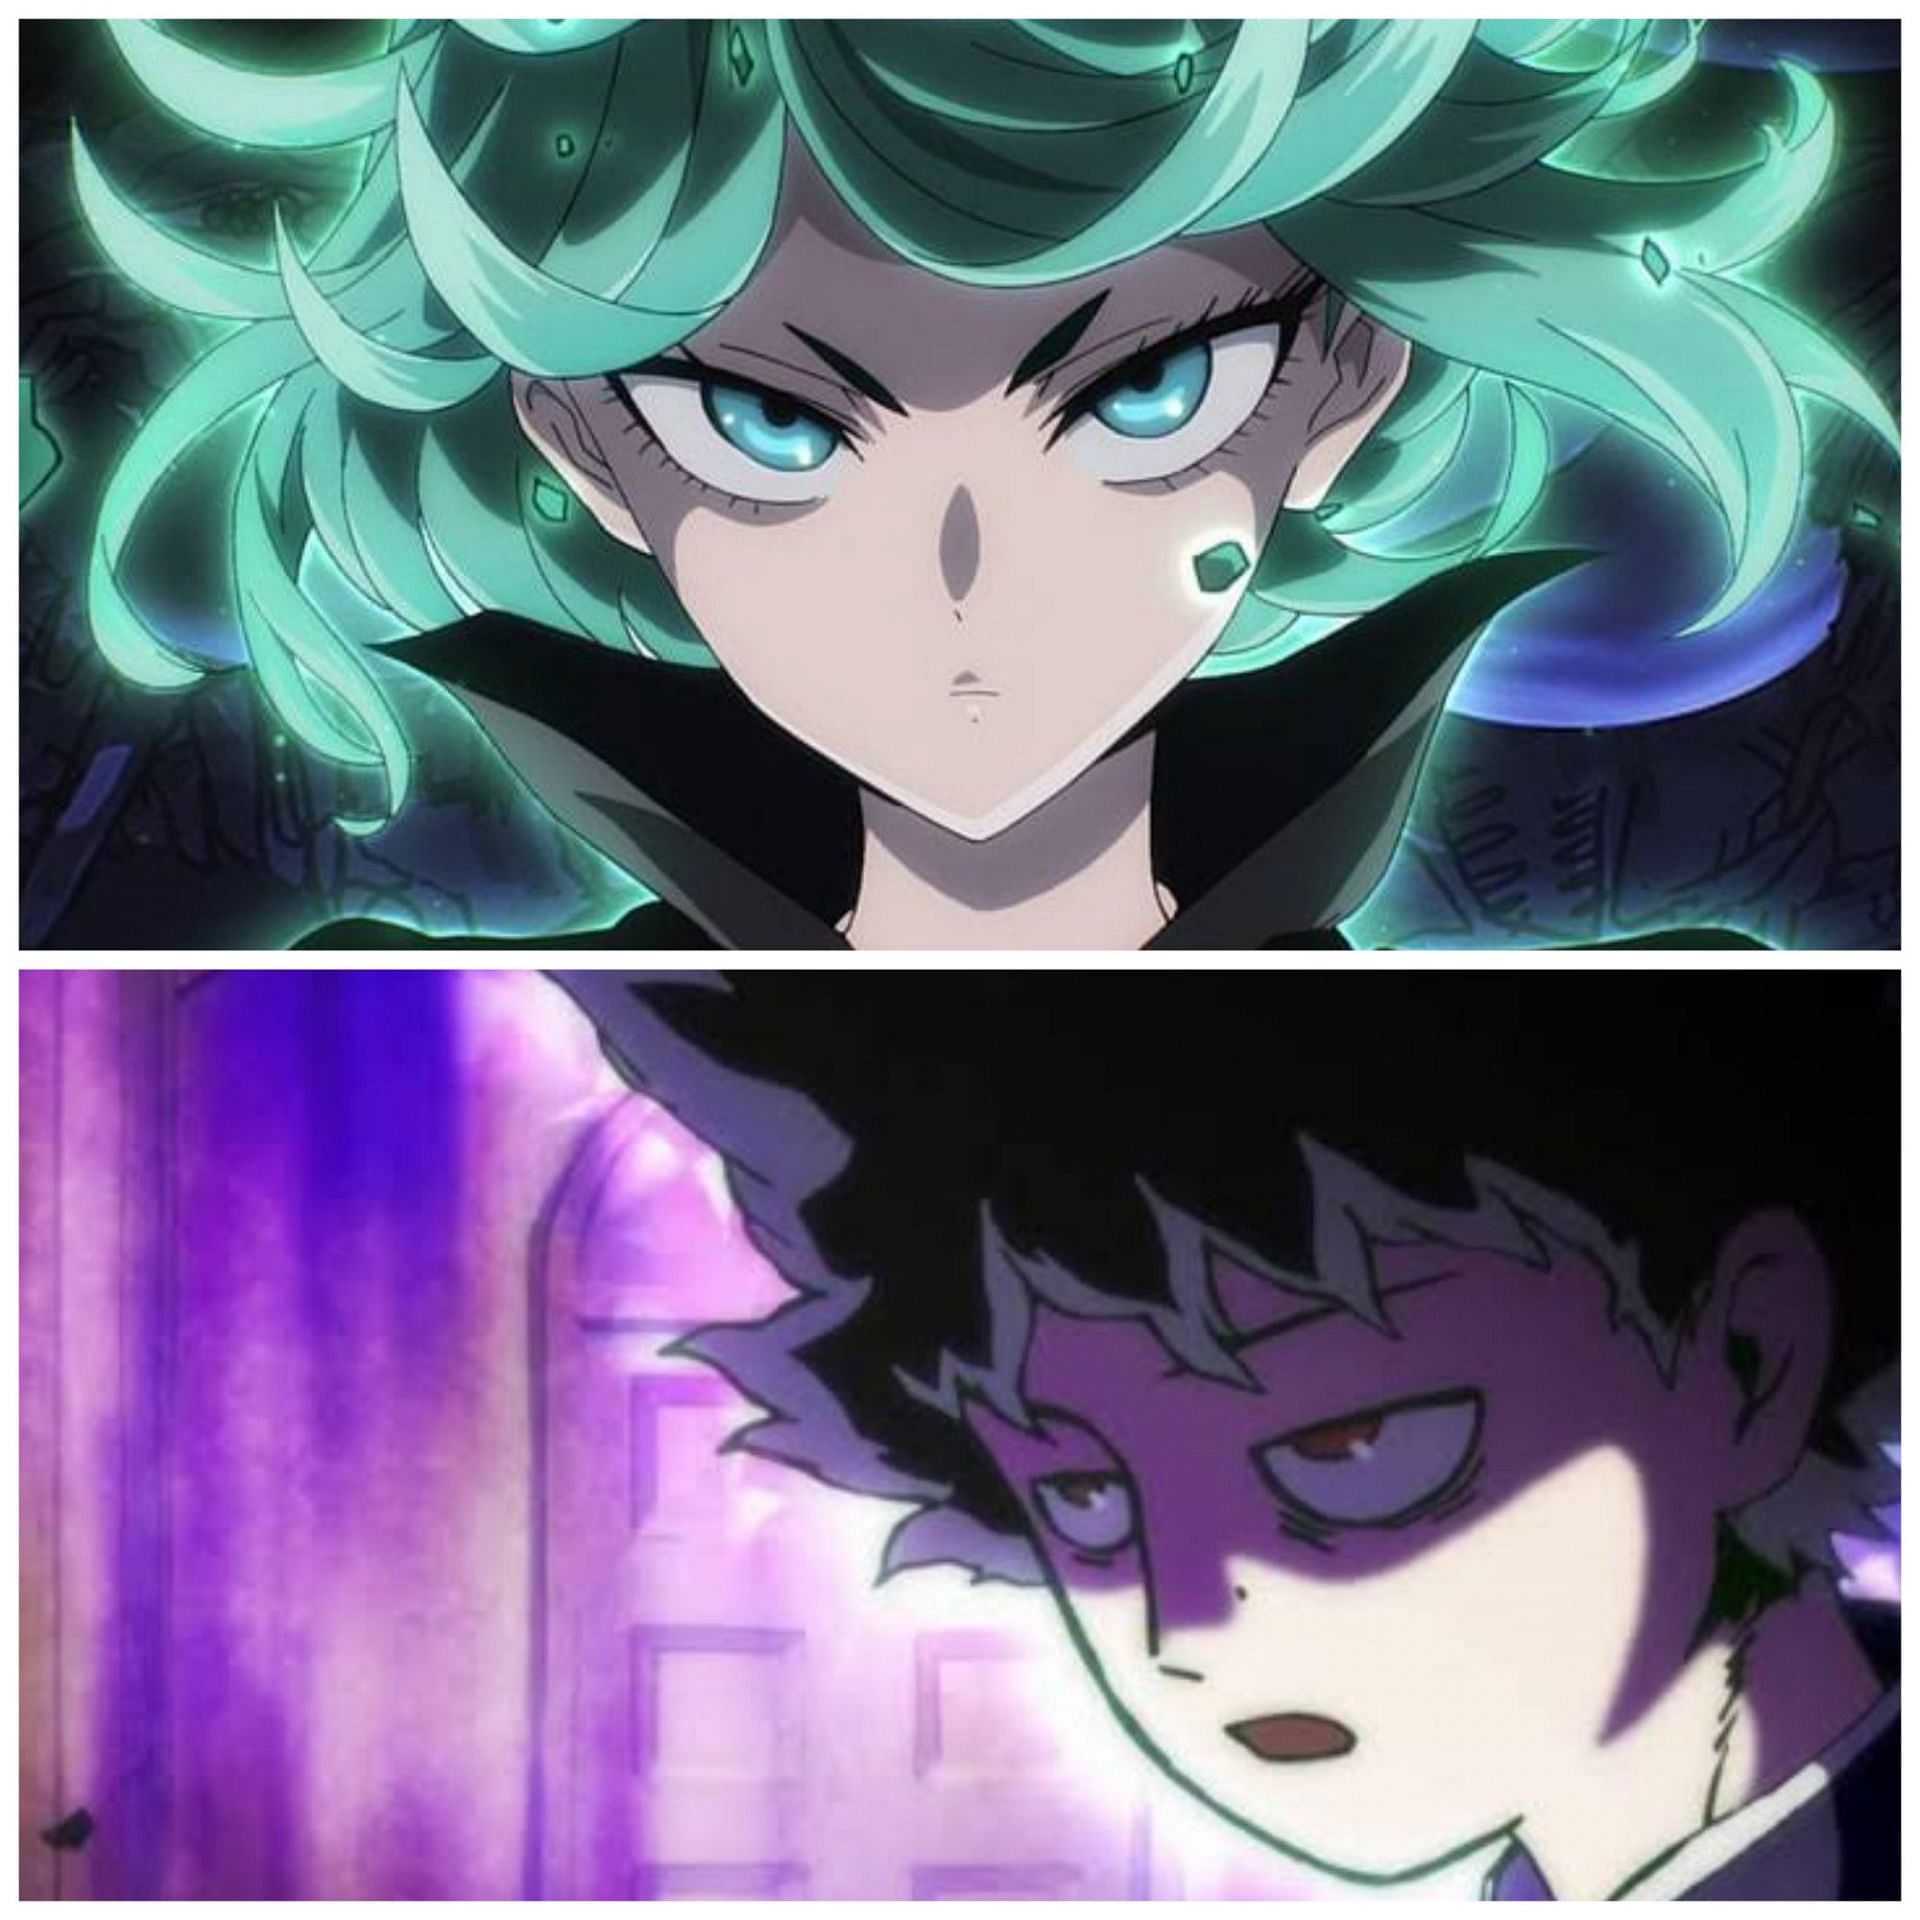 Who will win between Mob Psycho 100's Mob and One Punch Man's Tatsumaki?